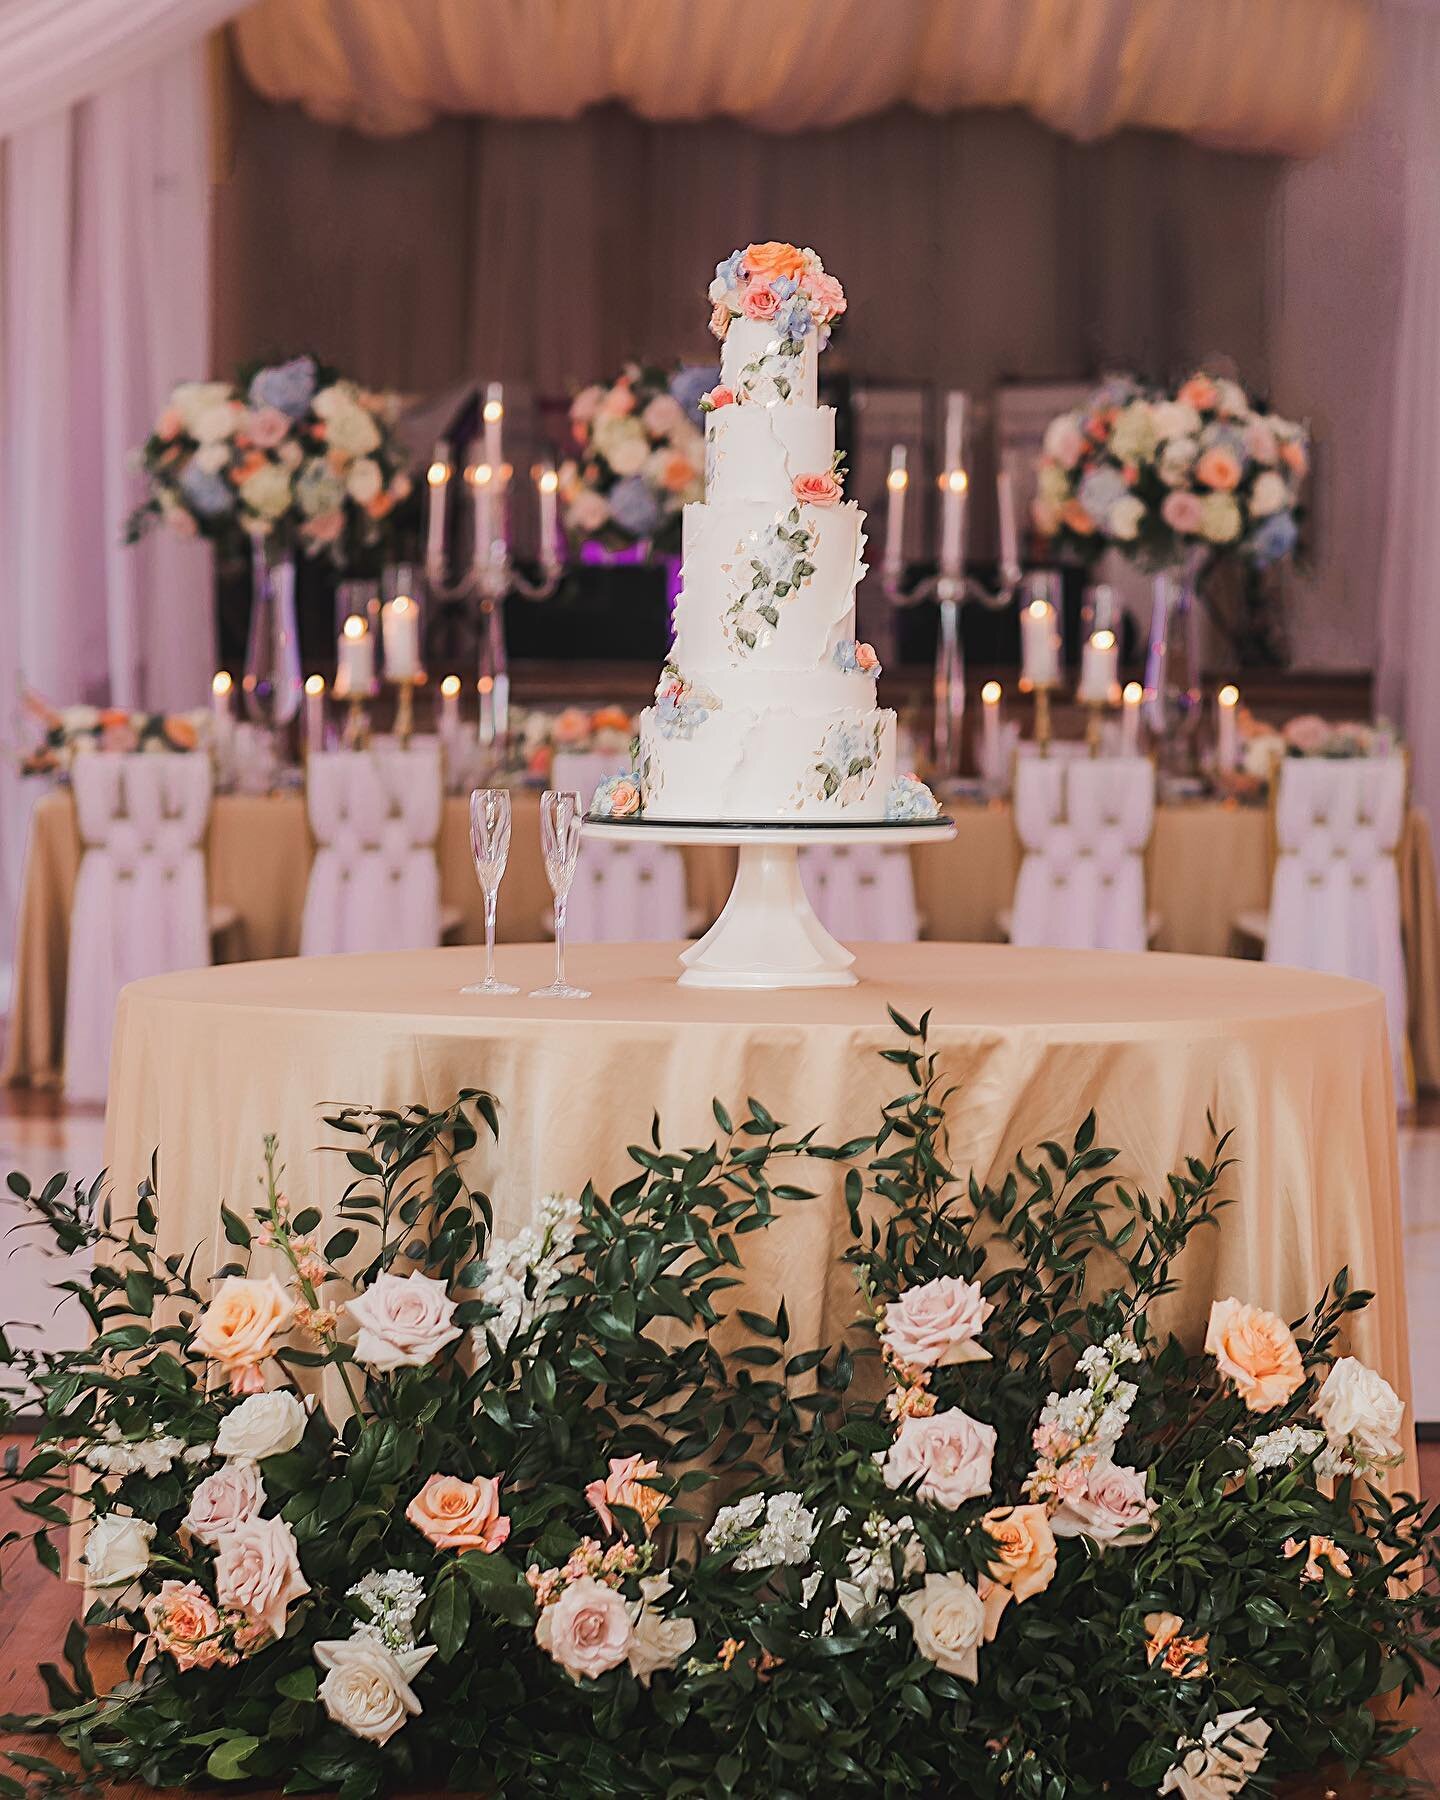 We just LOVE a gorgeous cake focal point! Look how beautiful this gorgeous wedding cake by @barbs_cakes. We loved designing this as a center point of our event design with fresh floral accents to give the this show stopper the finishing touch! Check 